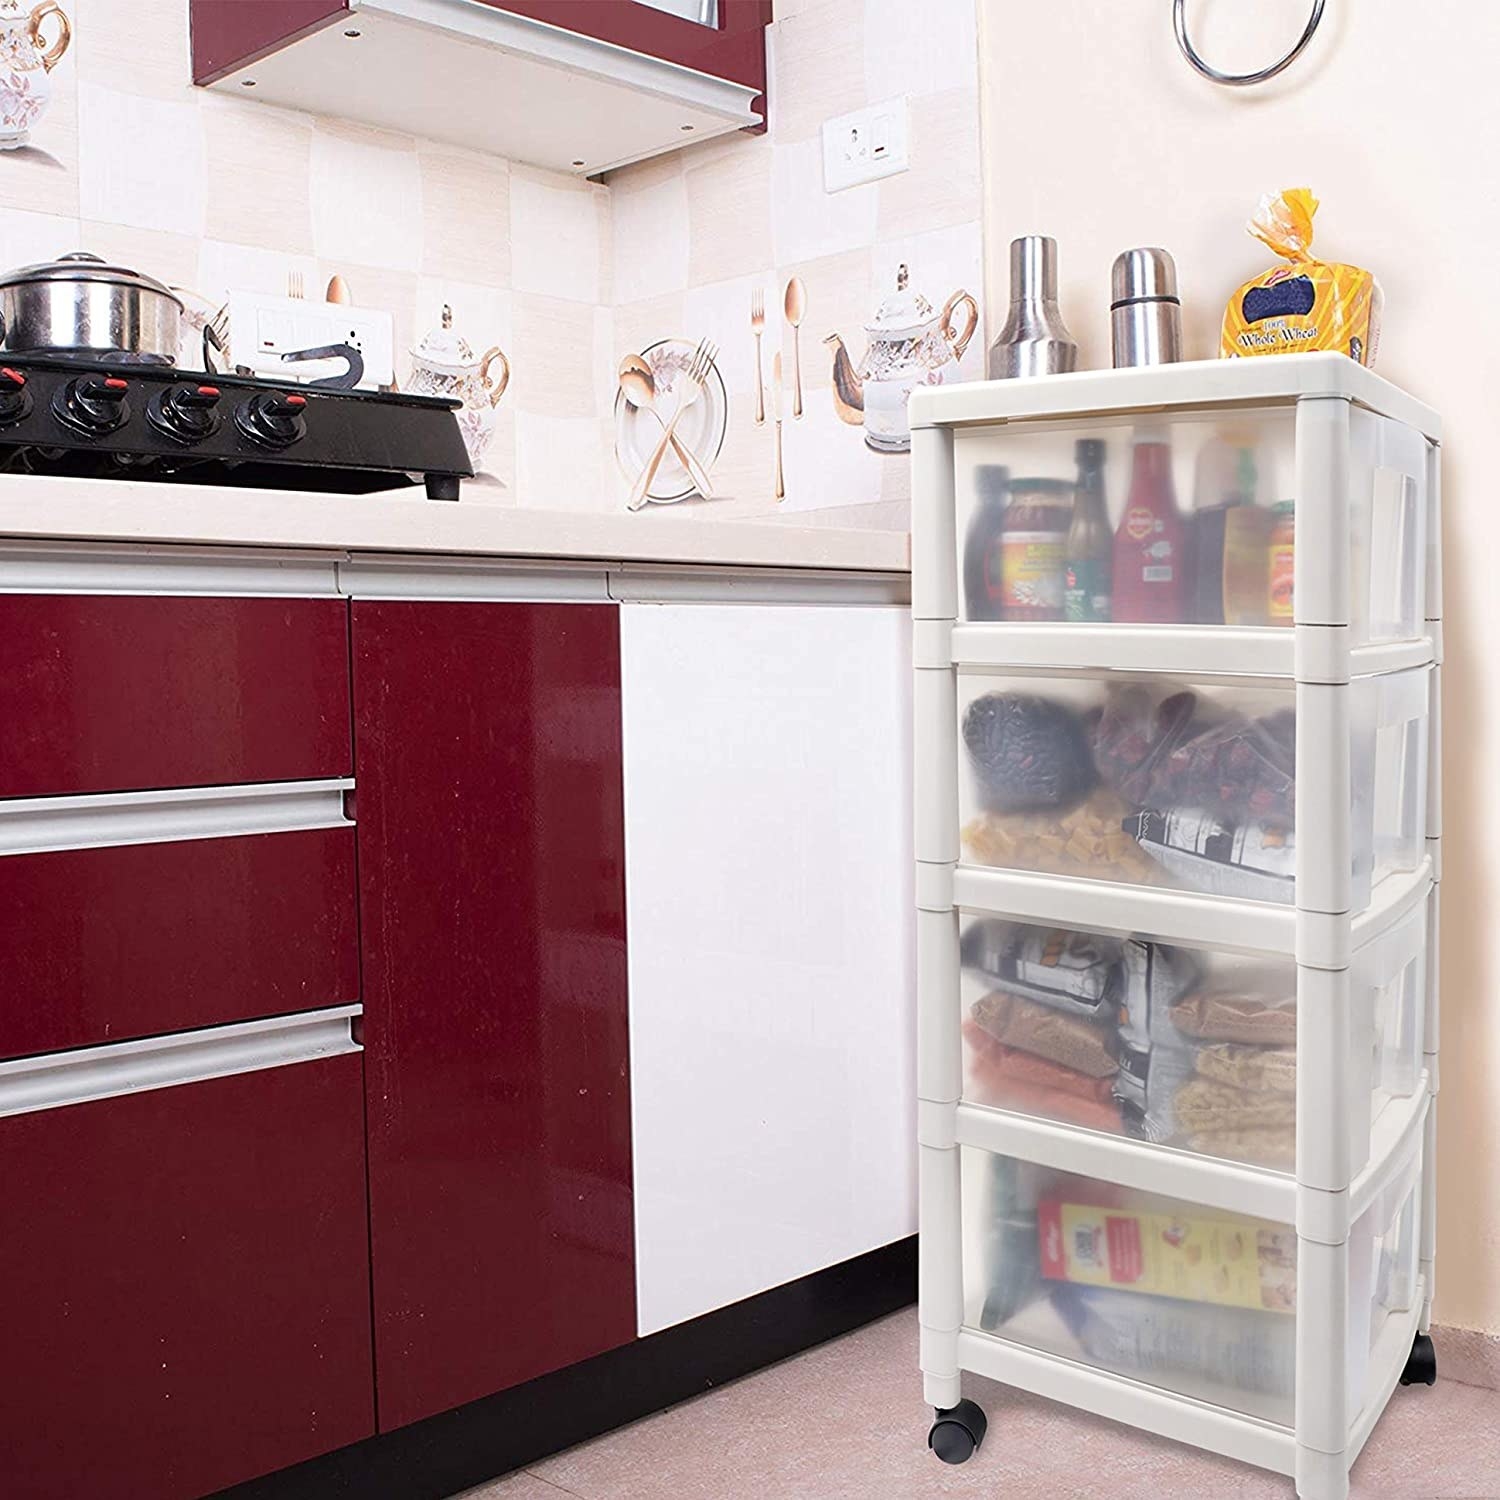 A portable storage rack in a kitchen